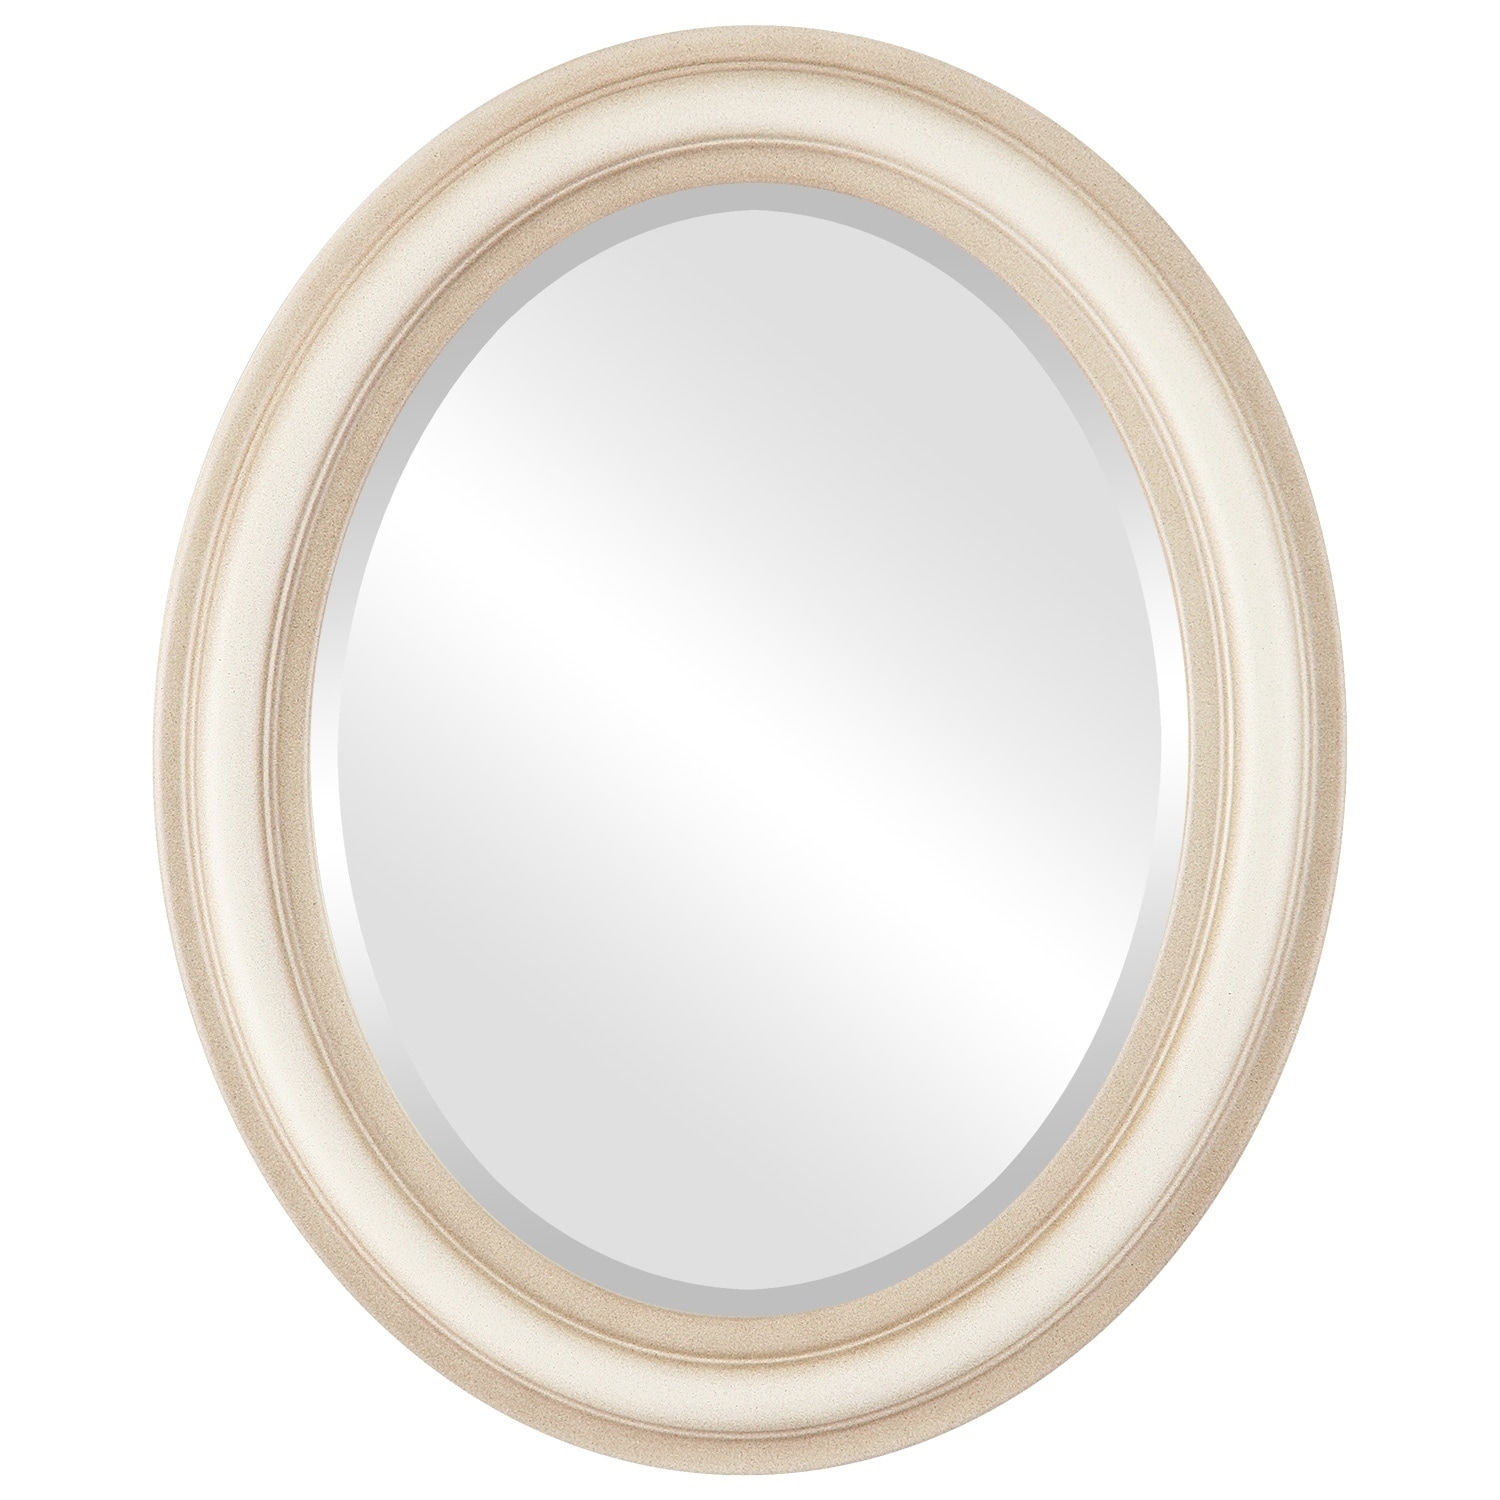 Oval Beveled Wall Mirror for Home Decor Philadelphia Style Silver Shade - 3